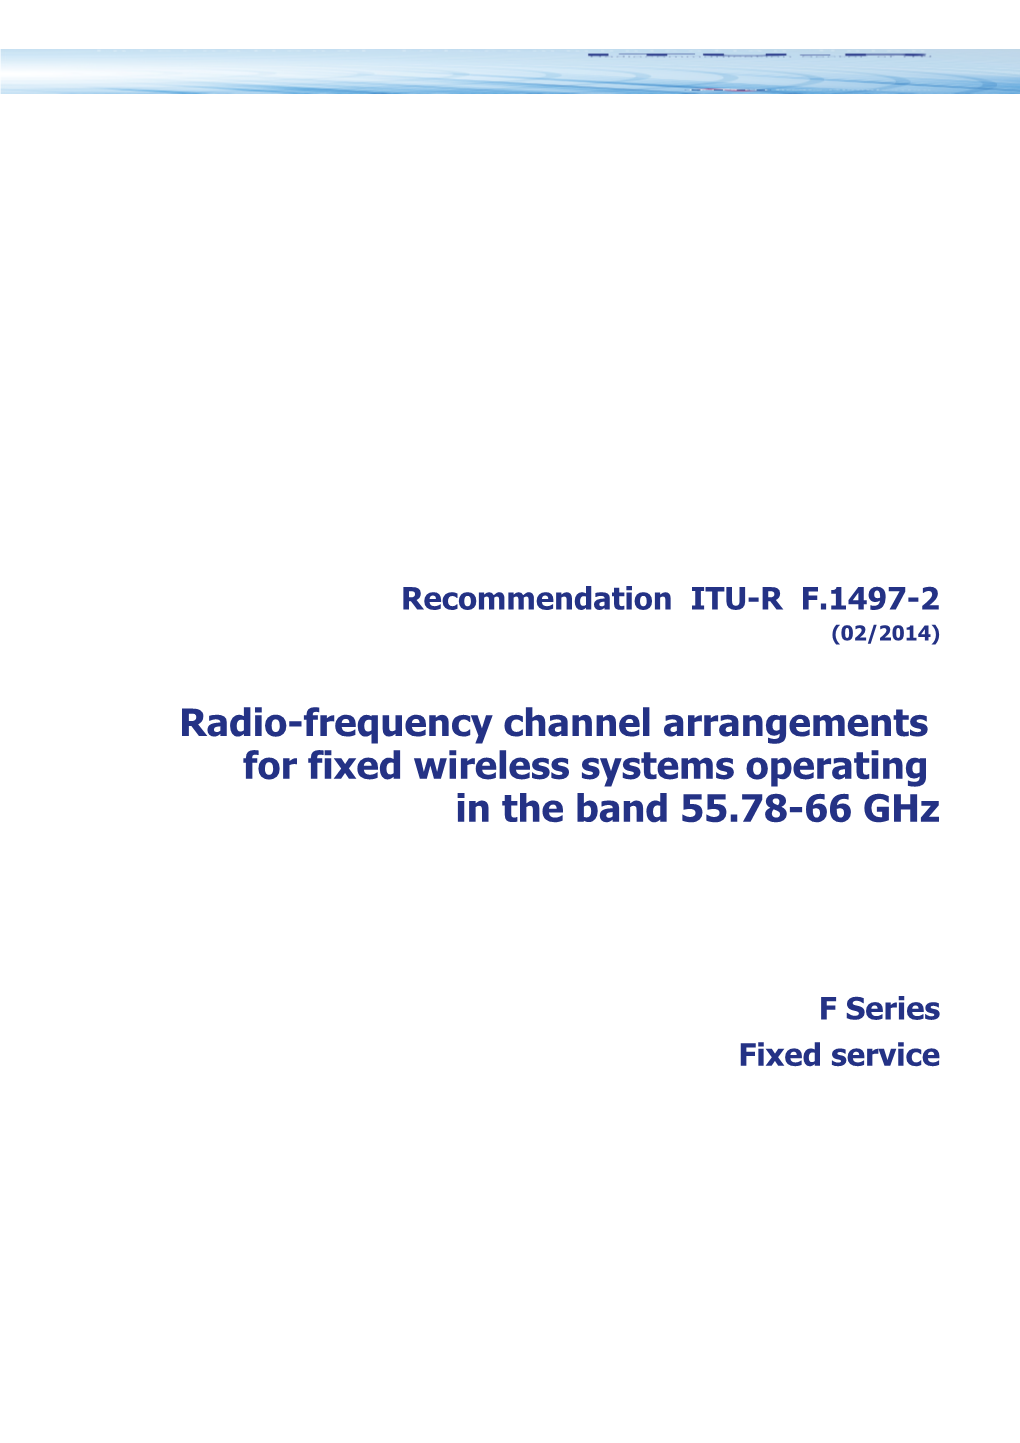 RECOMMENDATION ITU-R F.1497-2 - Radio-Frequency Channel Arrangements for Fixed Wireless